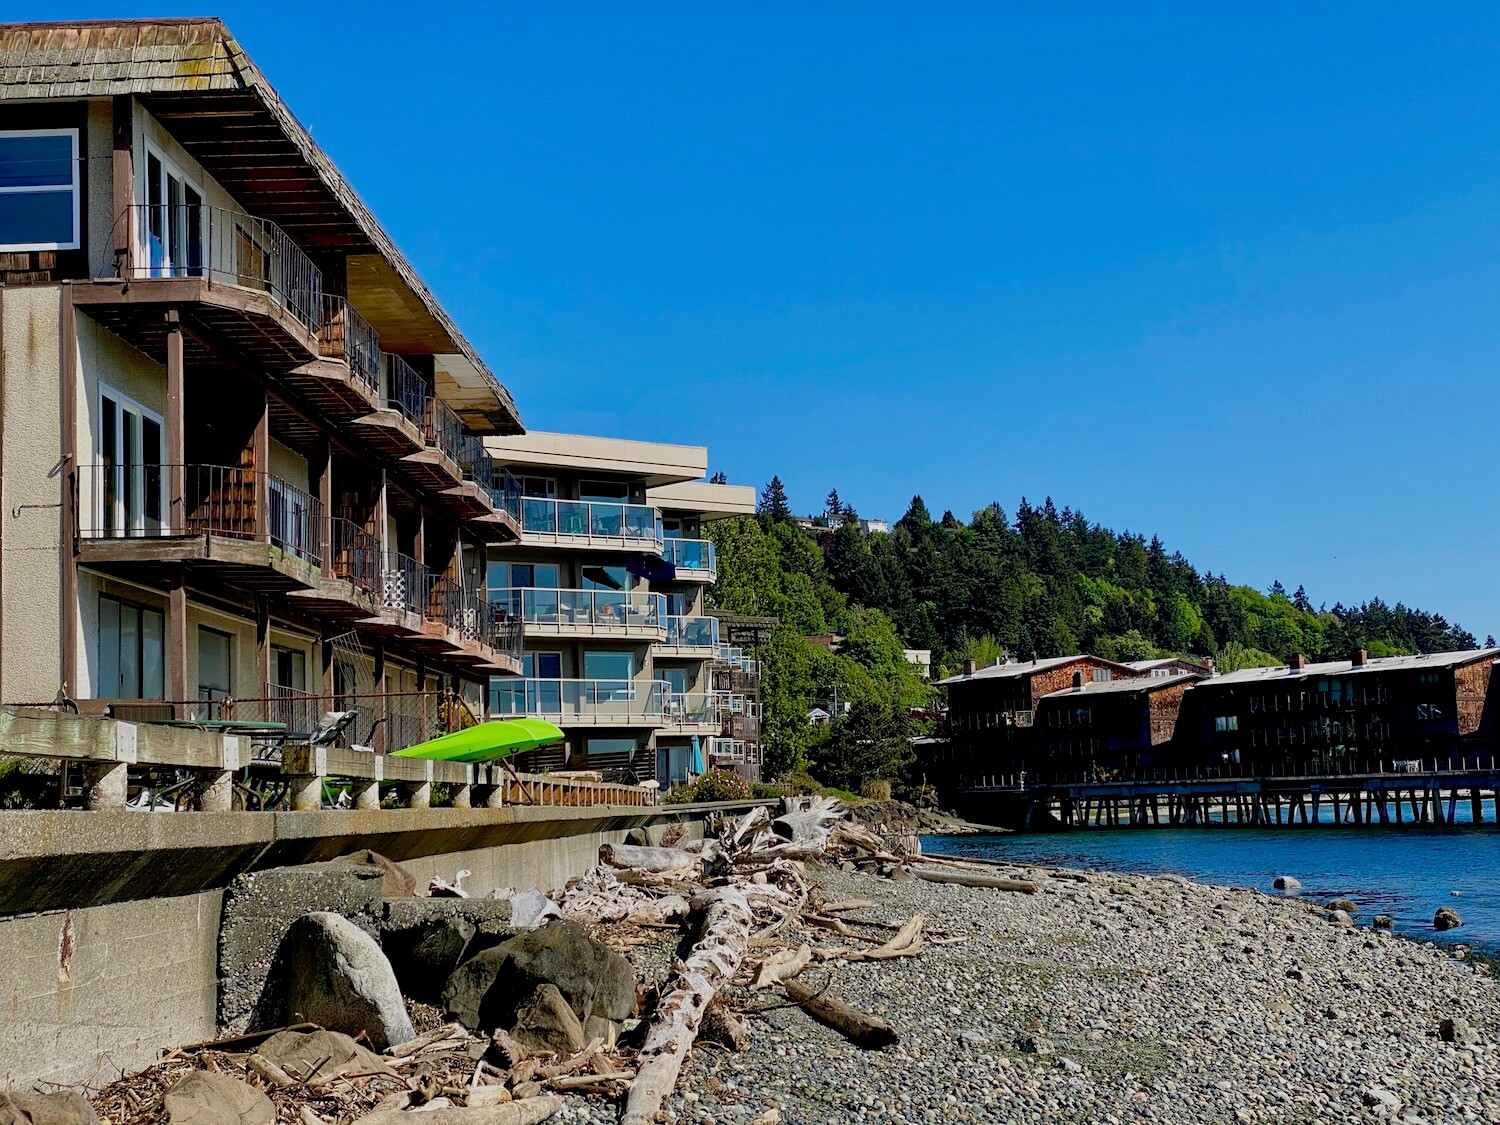 An apartment building on Alki Point in West Seattle appears to be going through renovations while two lime green kayaks hang out on the seawall. The beach has a collection of driftwood and the round rocks lead to the Puget Sound water. In the distance is another apartment building on pilings over the water.